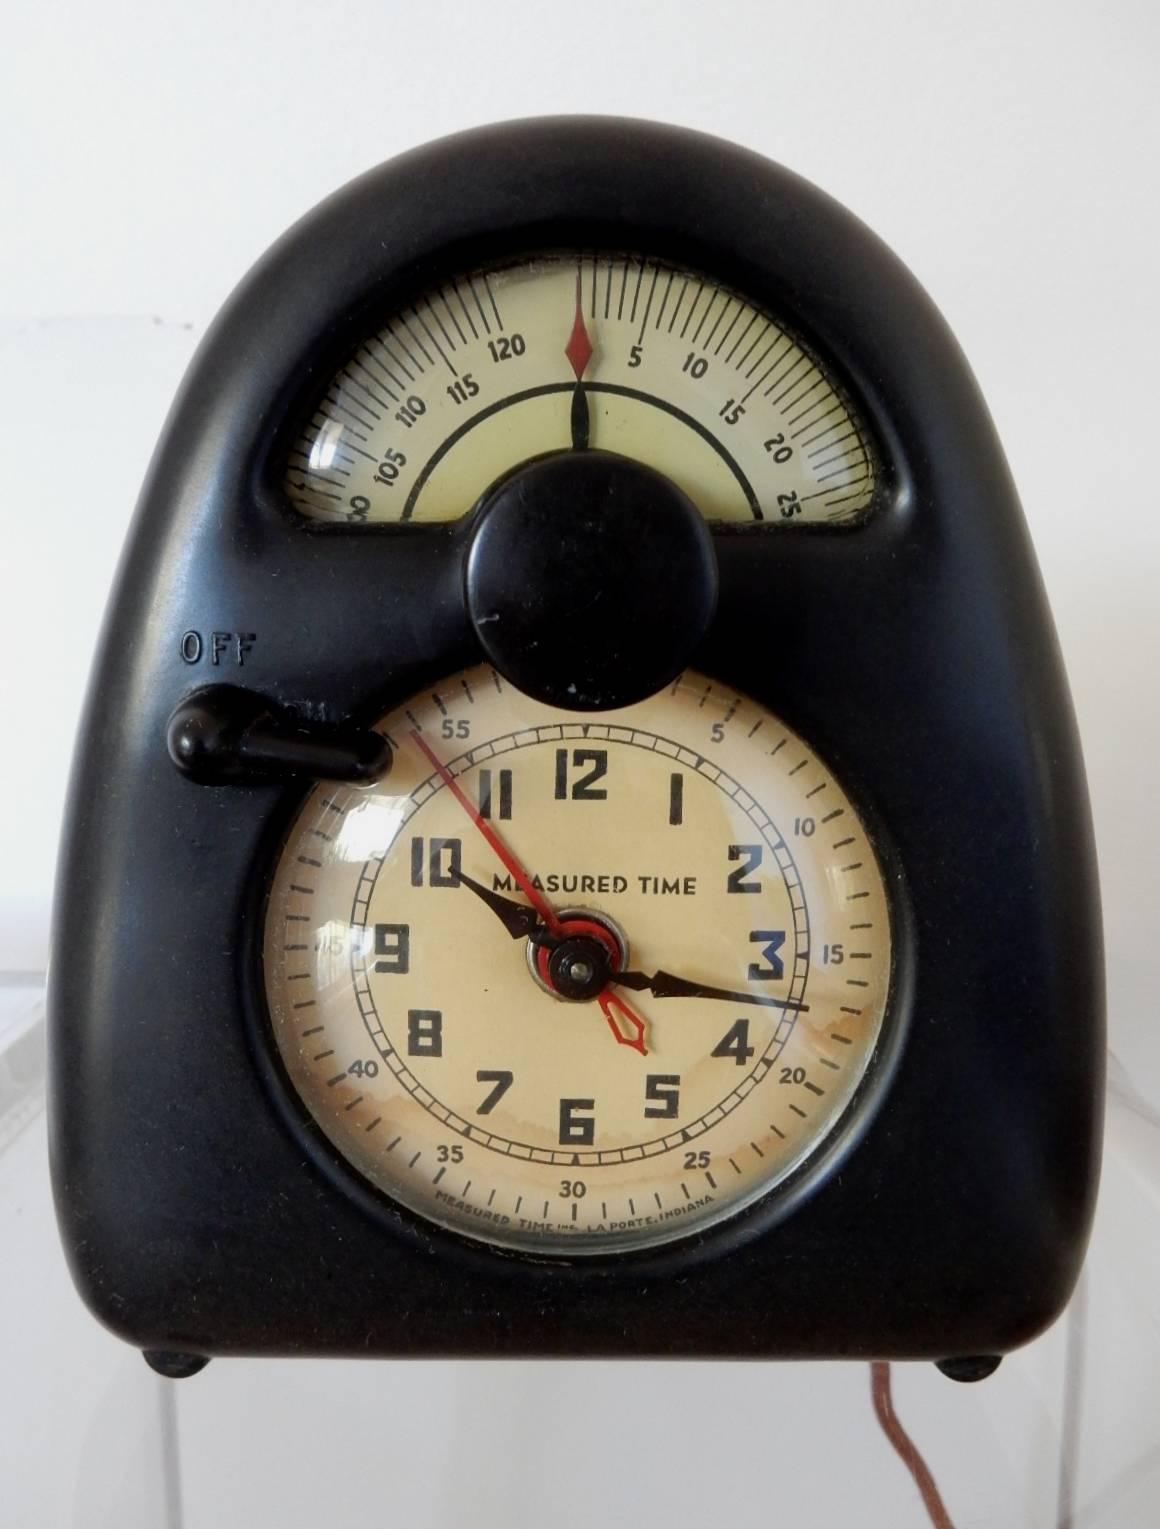 An original design by Isamu Noguchi (1904-1988), circa 1932.
Measured Time, model E, bakelite, enameled metal desk clock.
This clock is completely original including cloth cord and in perfect working order. Keeps perfect time and runs silent. No